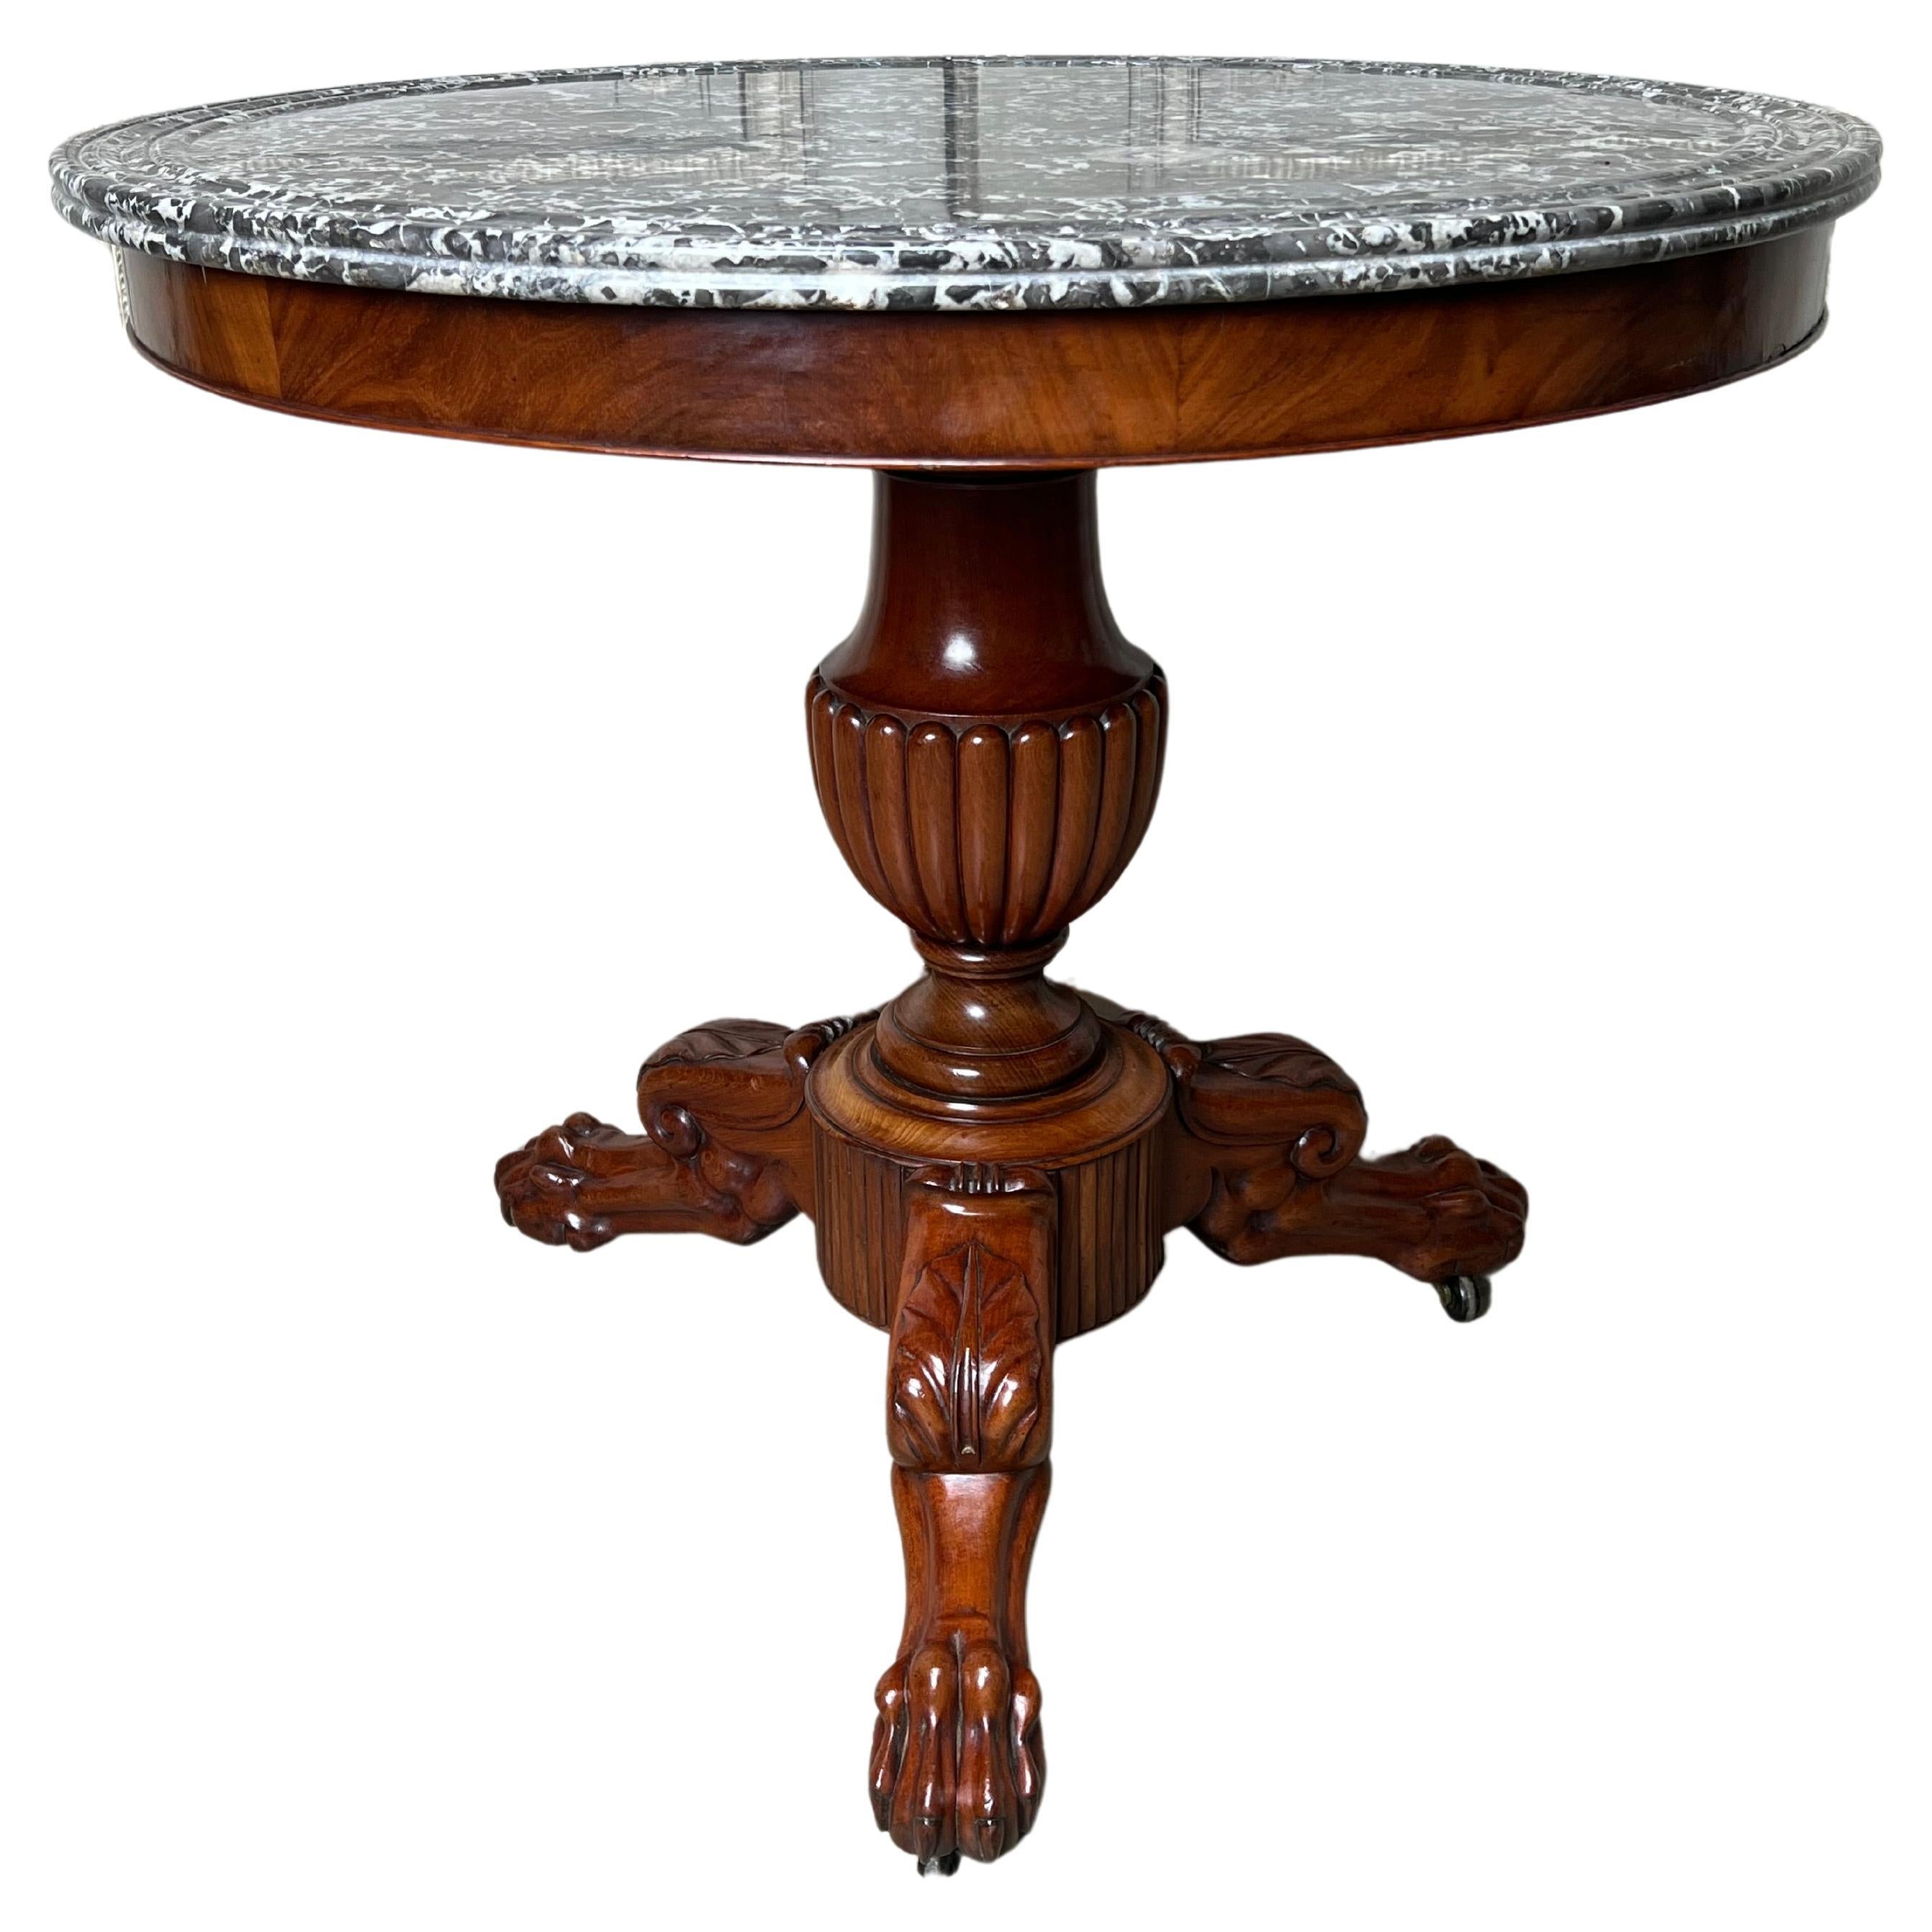 French Charles X Mahogany and Marble Gueridon Center Table